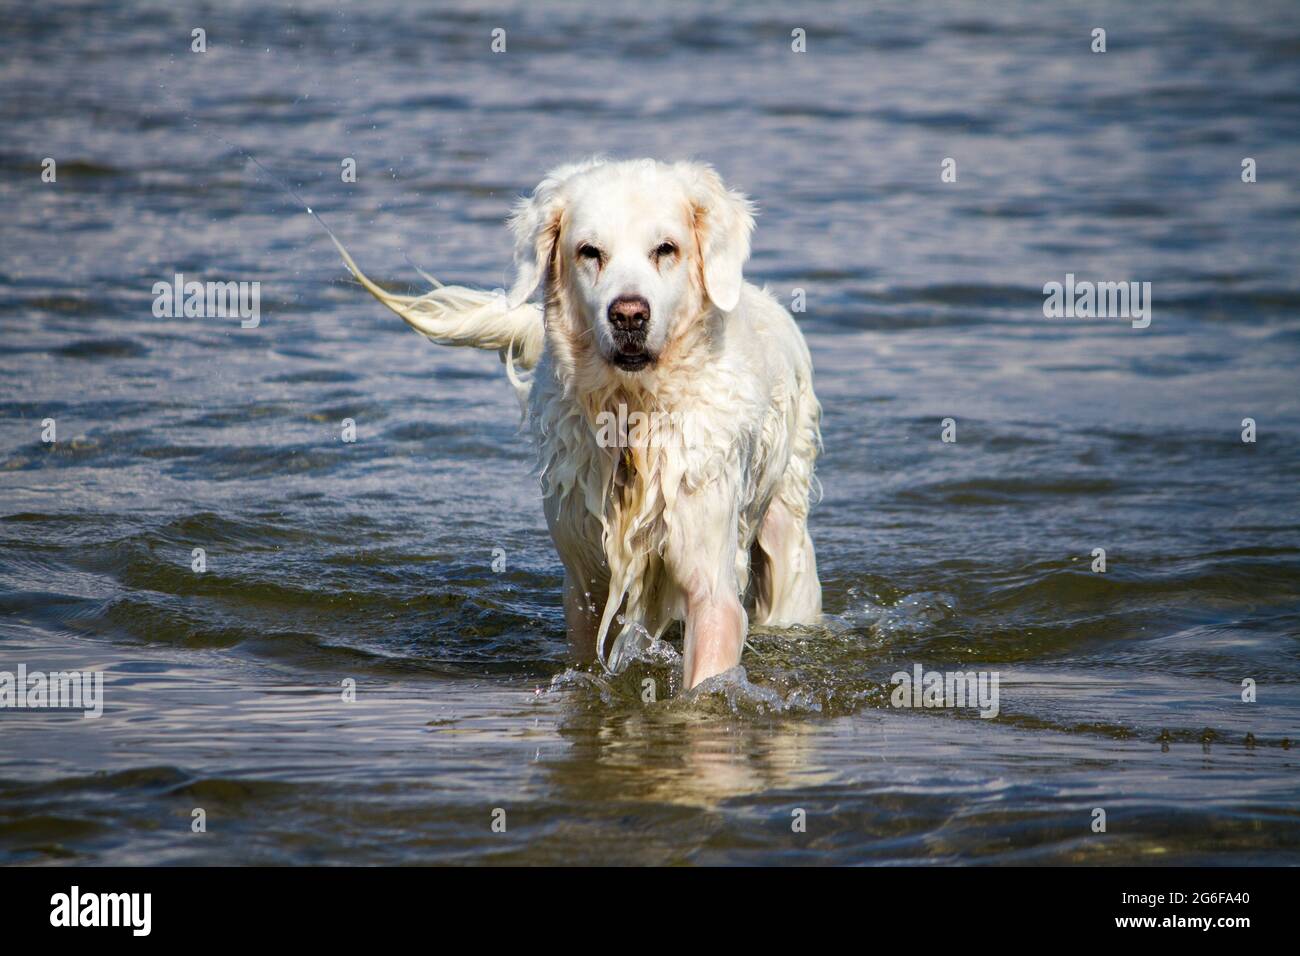 View of a cute wet white dog playing in the water. Stock Photo